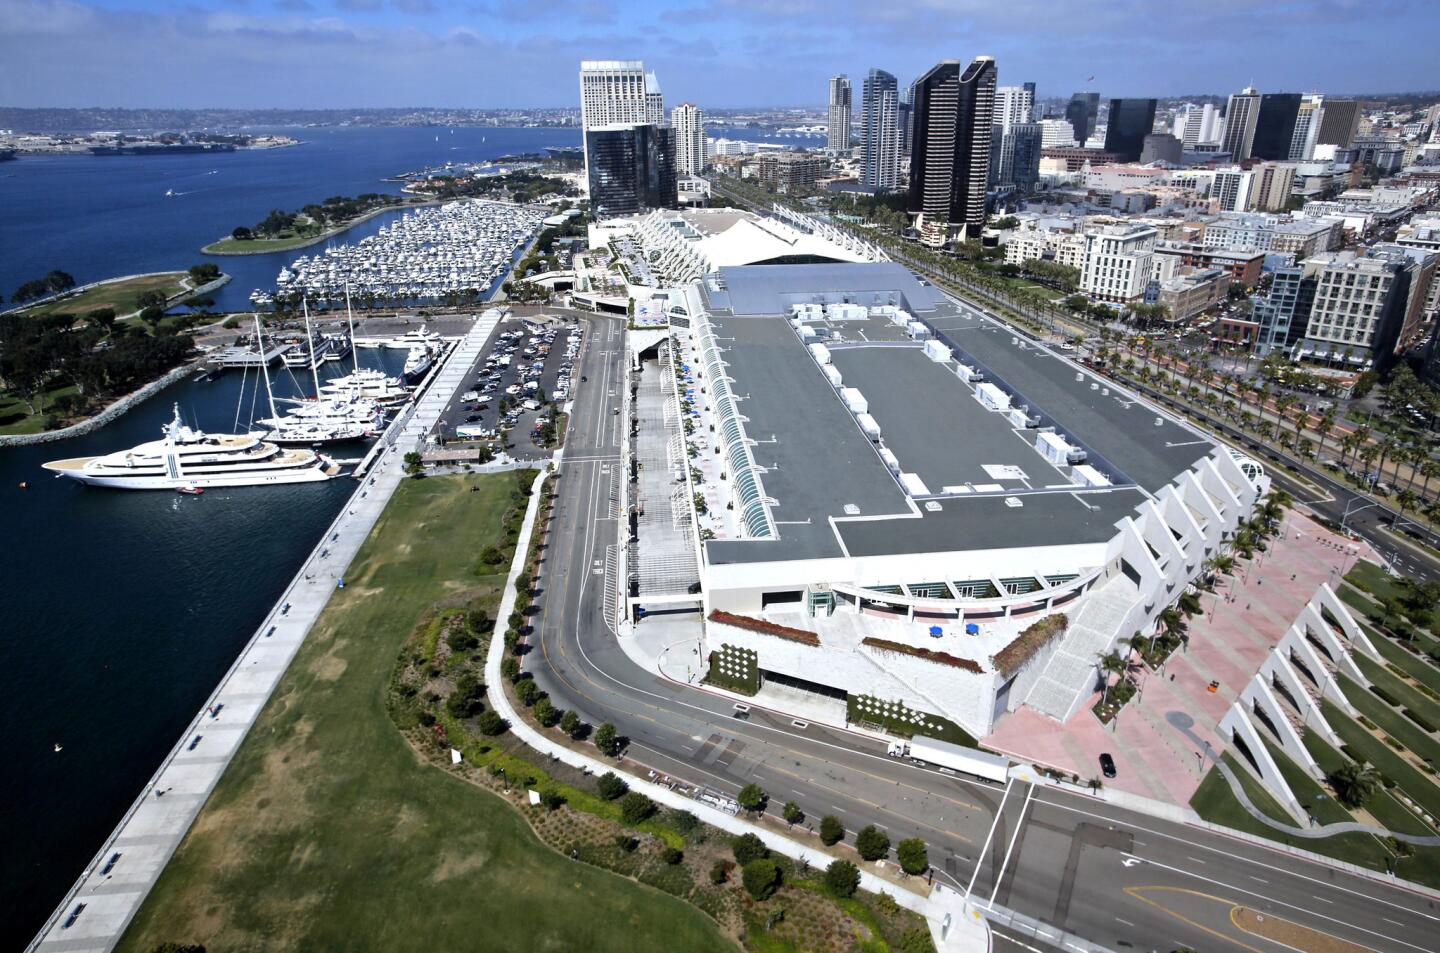 The convention center has housed the annual Comic-Con event for years. But the San Diego Chargers oppose the convention center expansion and favor building an additional convention venue several blocks away.